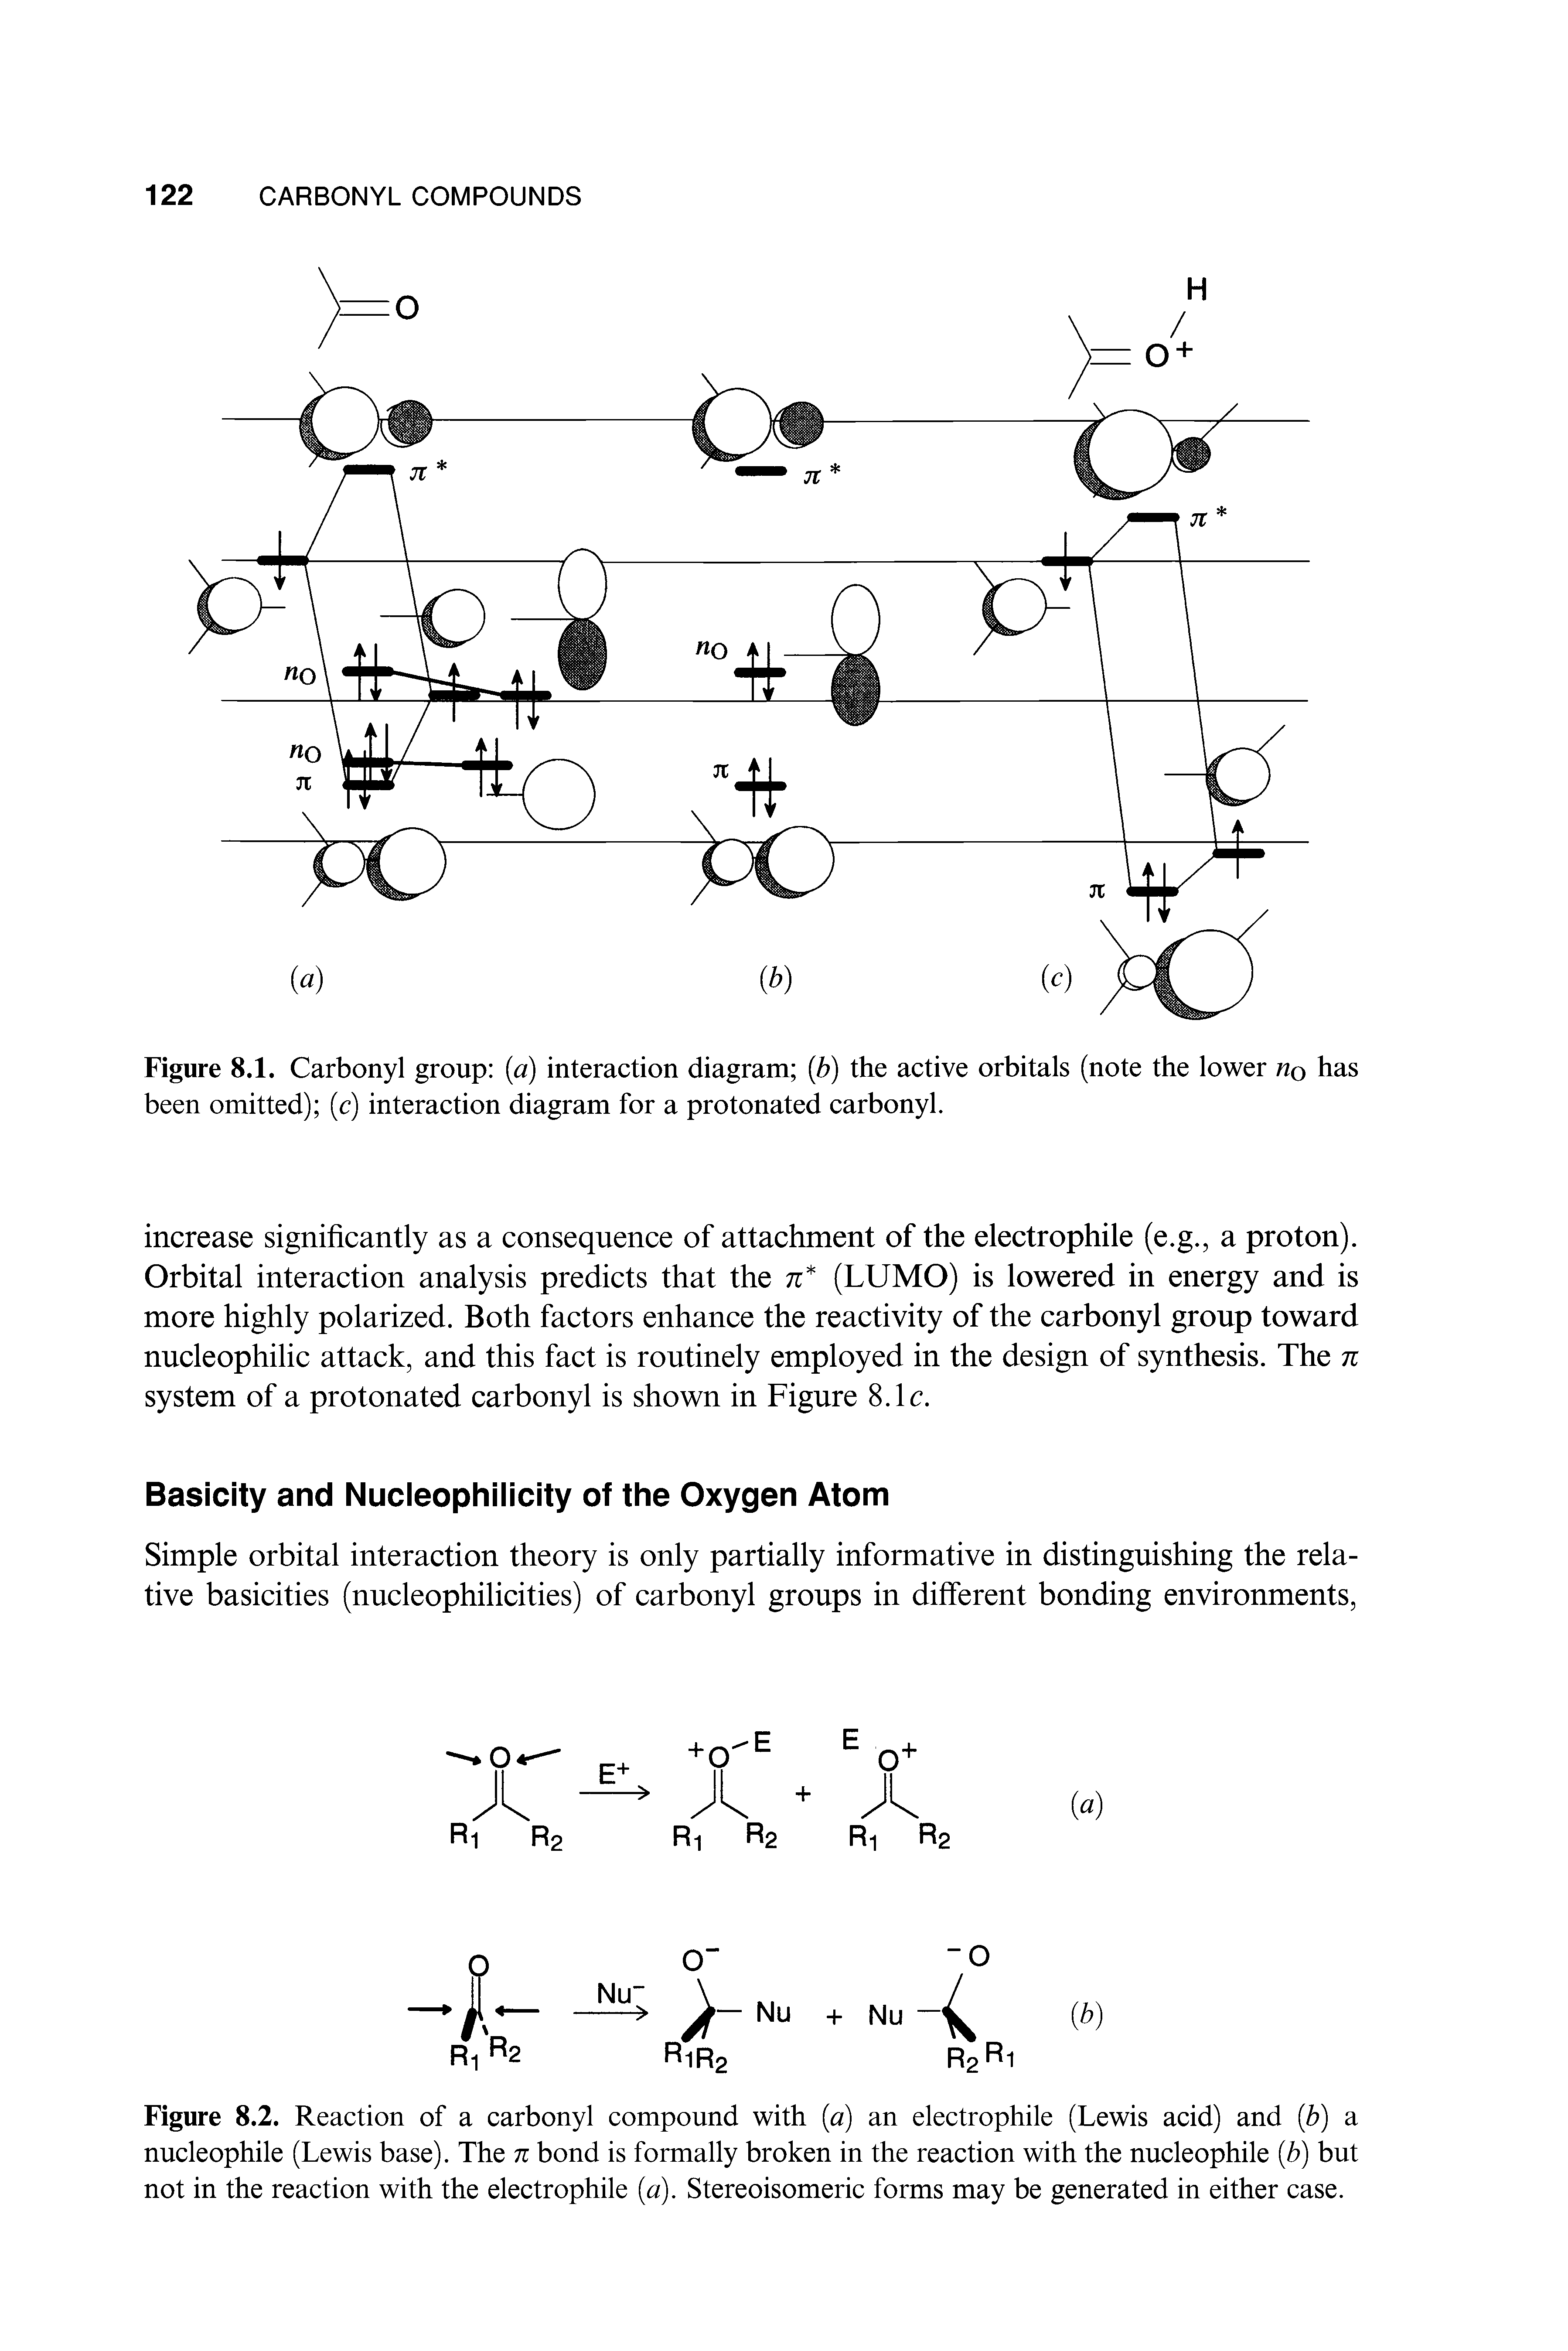 Figure 8.2. Reaction of a carbonyl compound with (a) an electrophile (Lewis acid) and (b) a nucleophile (Lewis base). The n bond is formally broken in the reaction with the nucleophile (b) but not in the reaction with the electrophile (a). Stereoisomeric forms may be generated in either case.